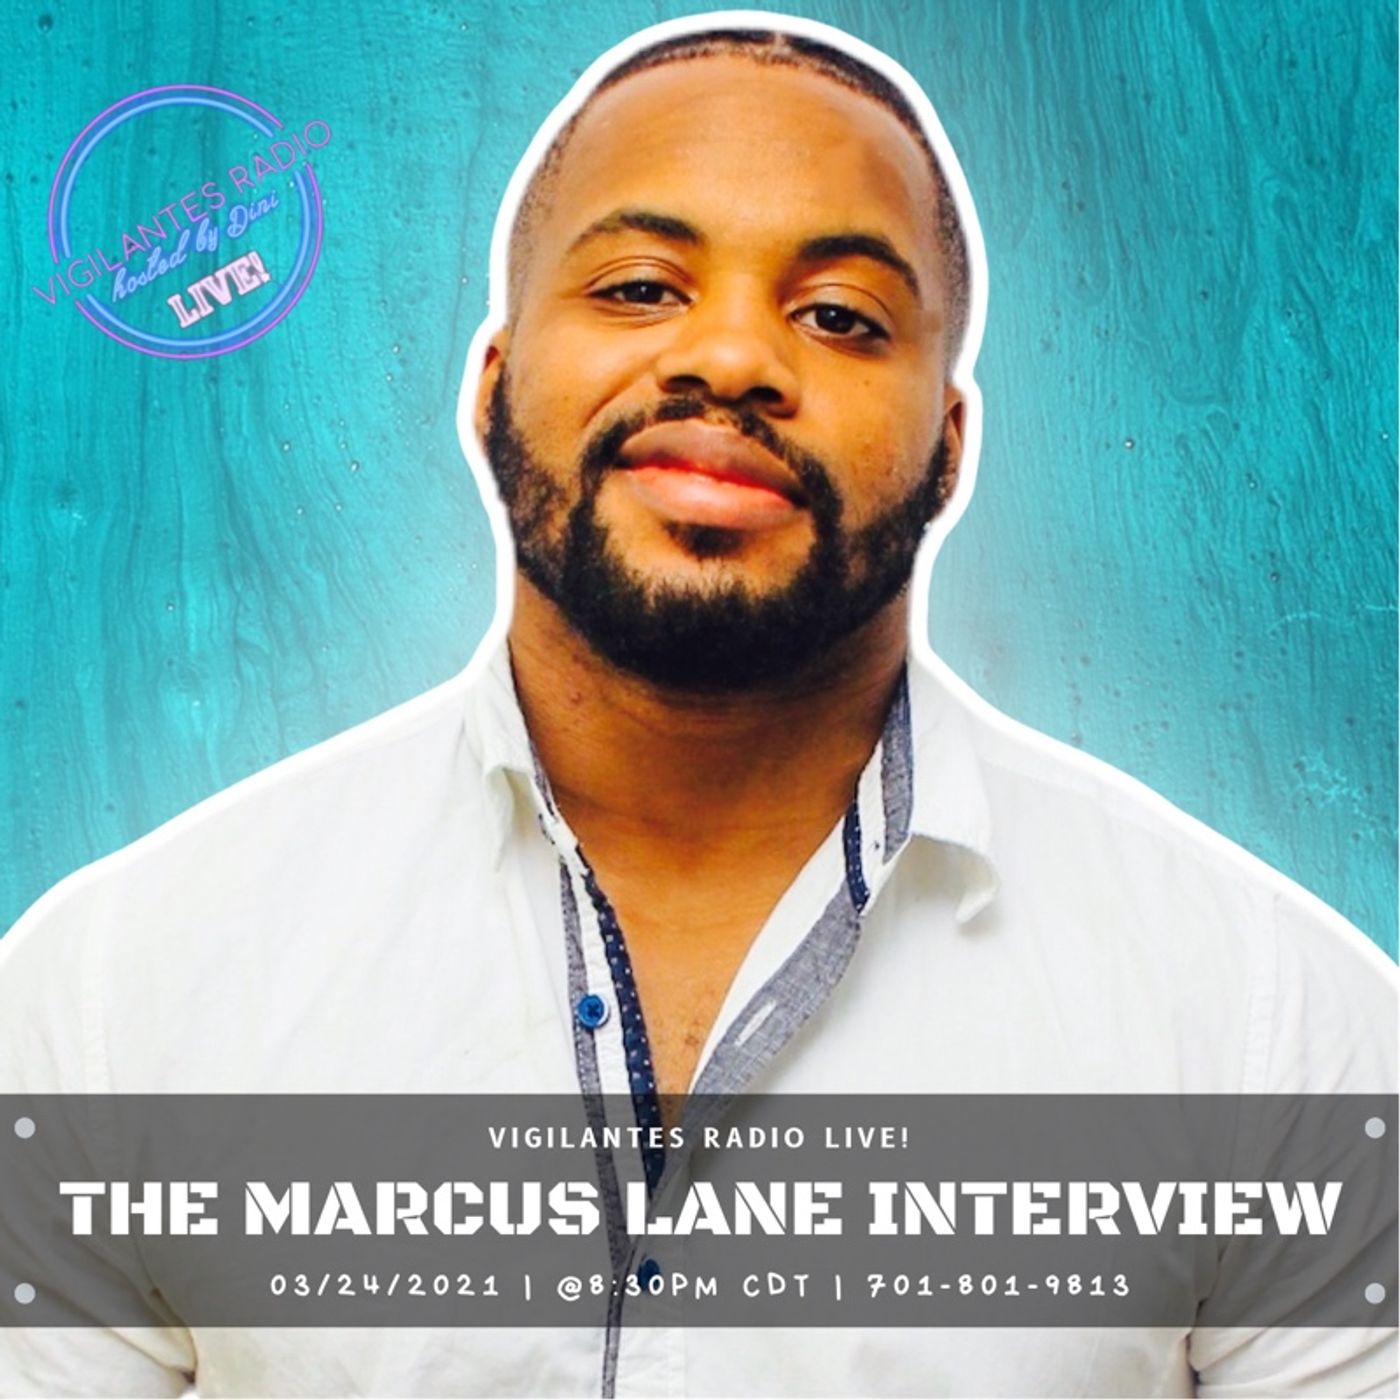 The Marcus Lane Interview. Image